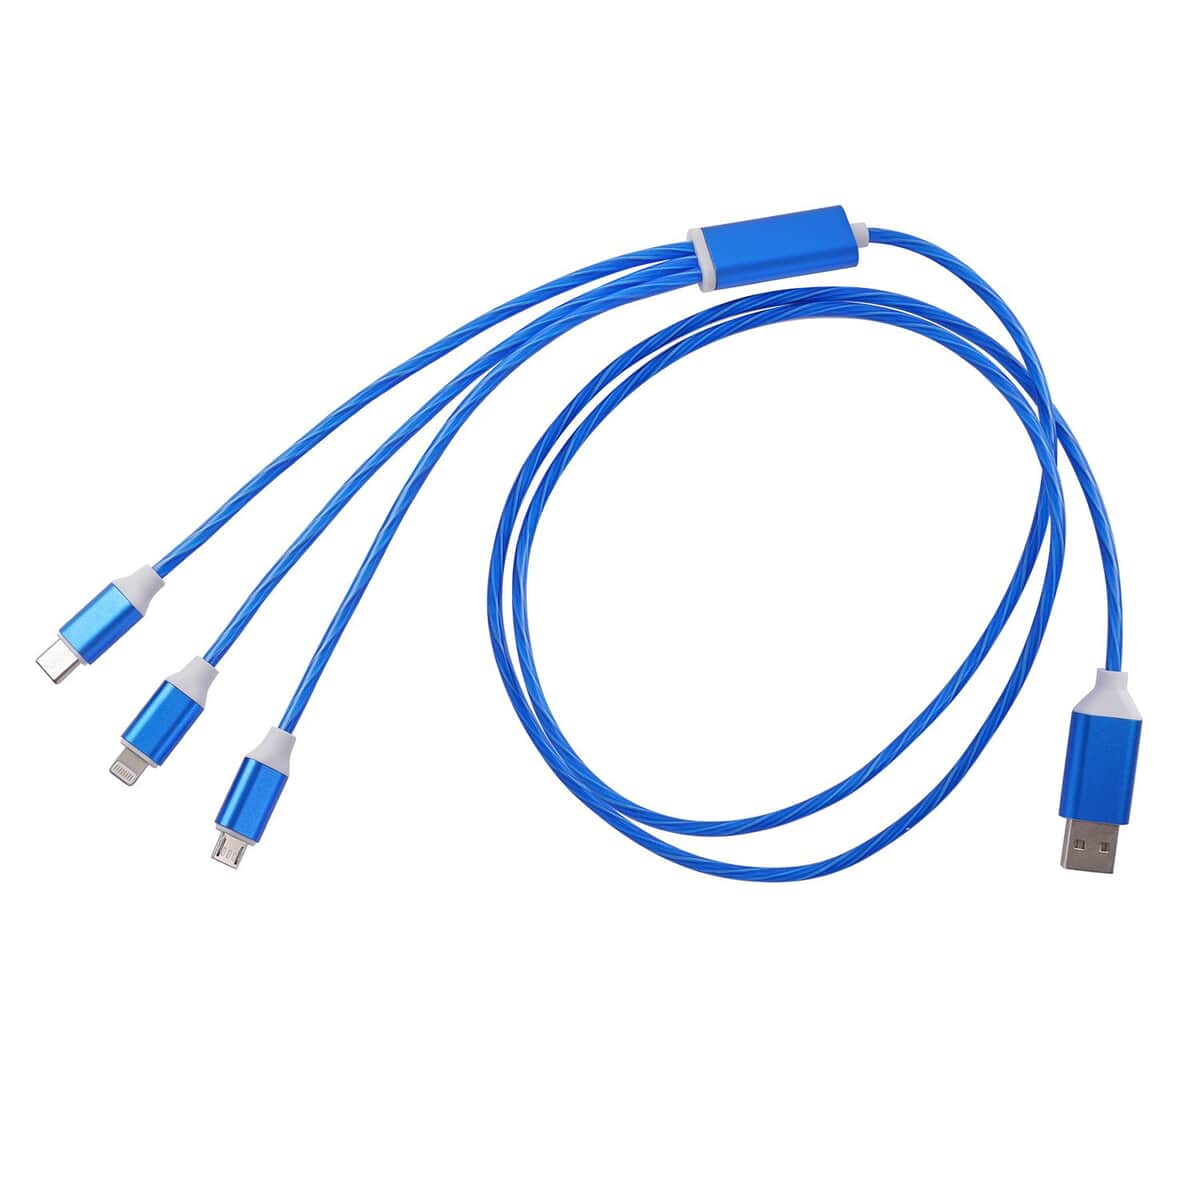 2pcs Set 3 in 1 Light Moving Charging Cable - Blue image number 0